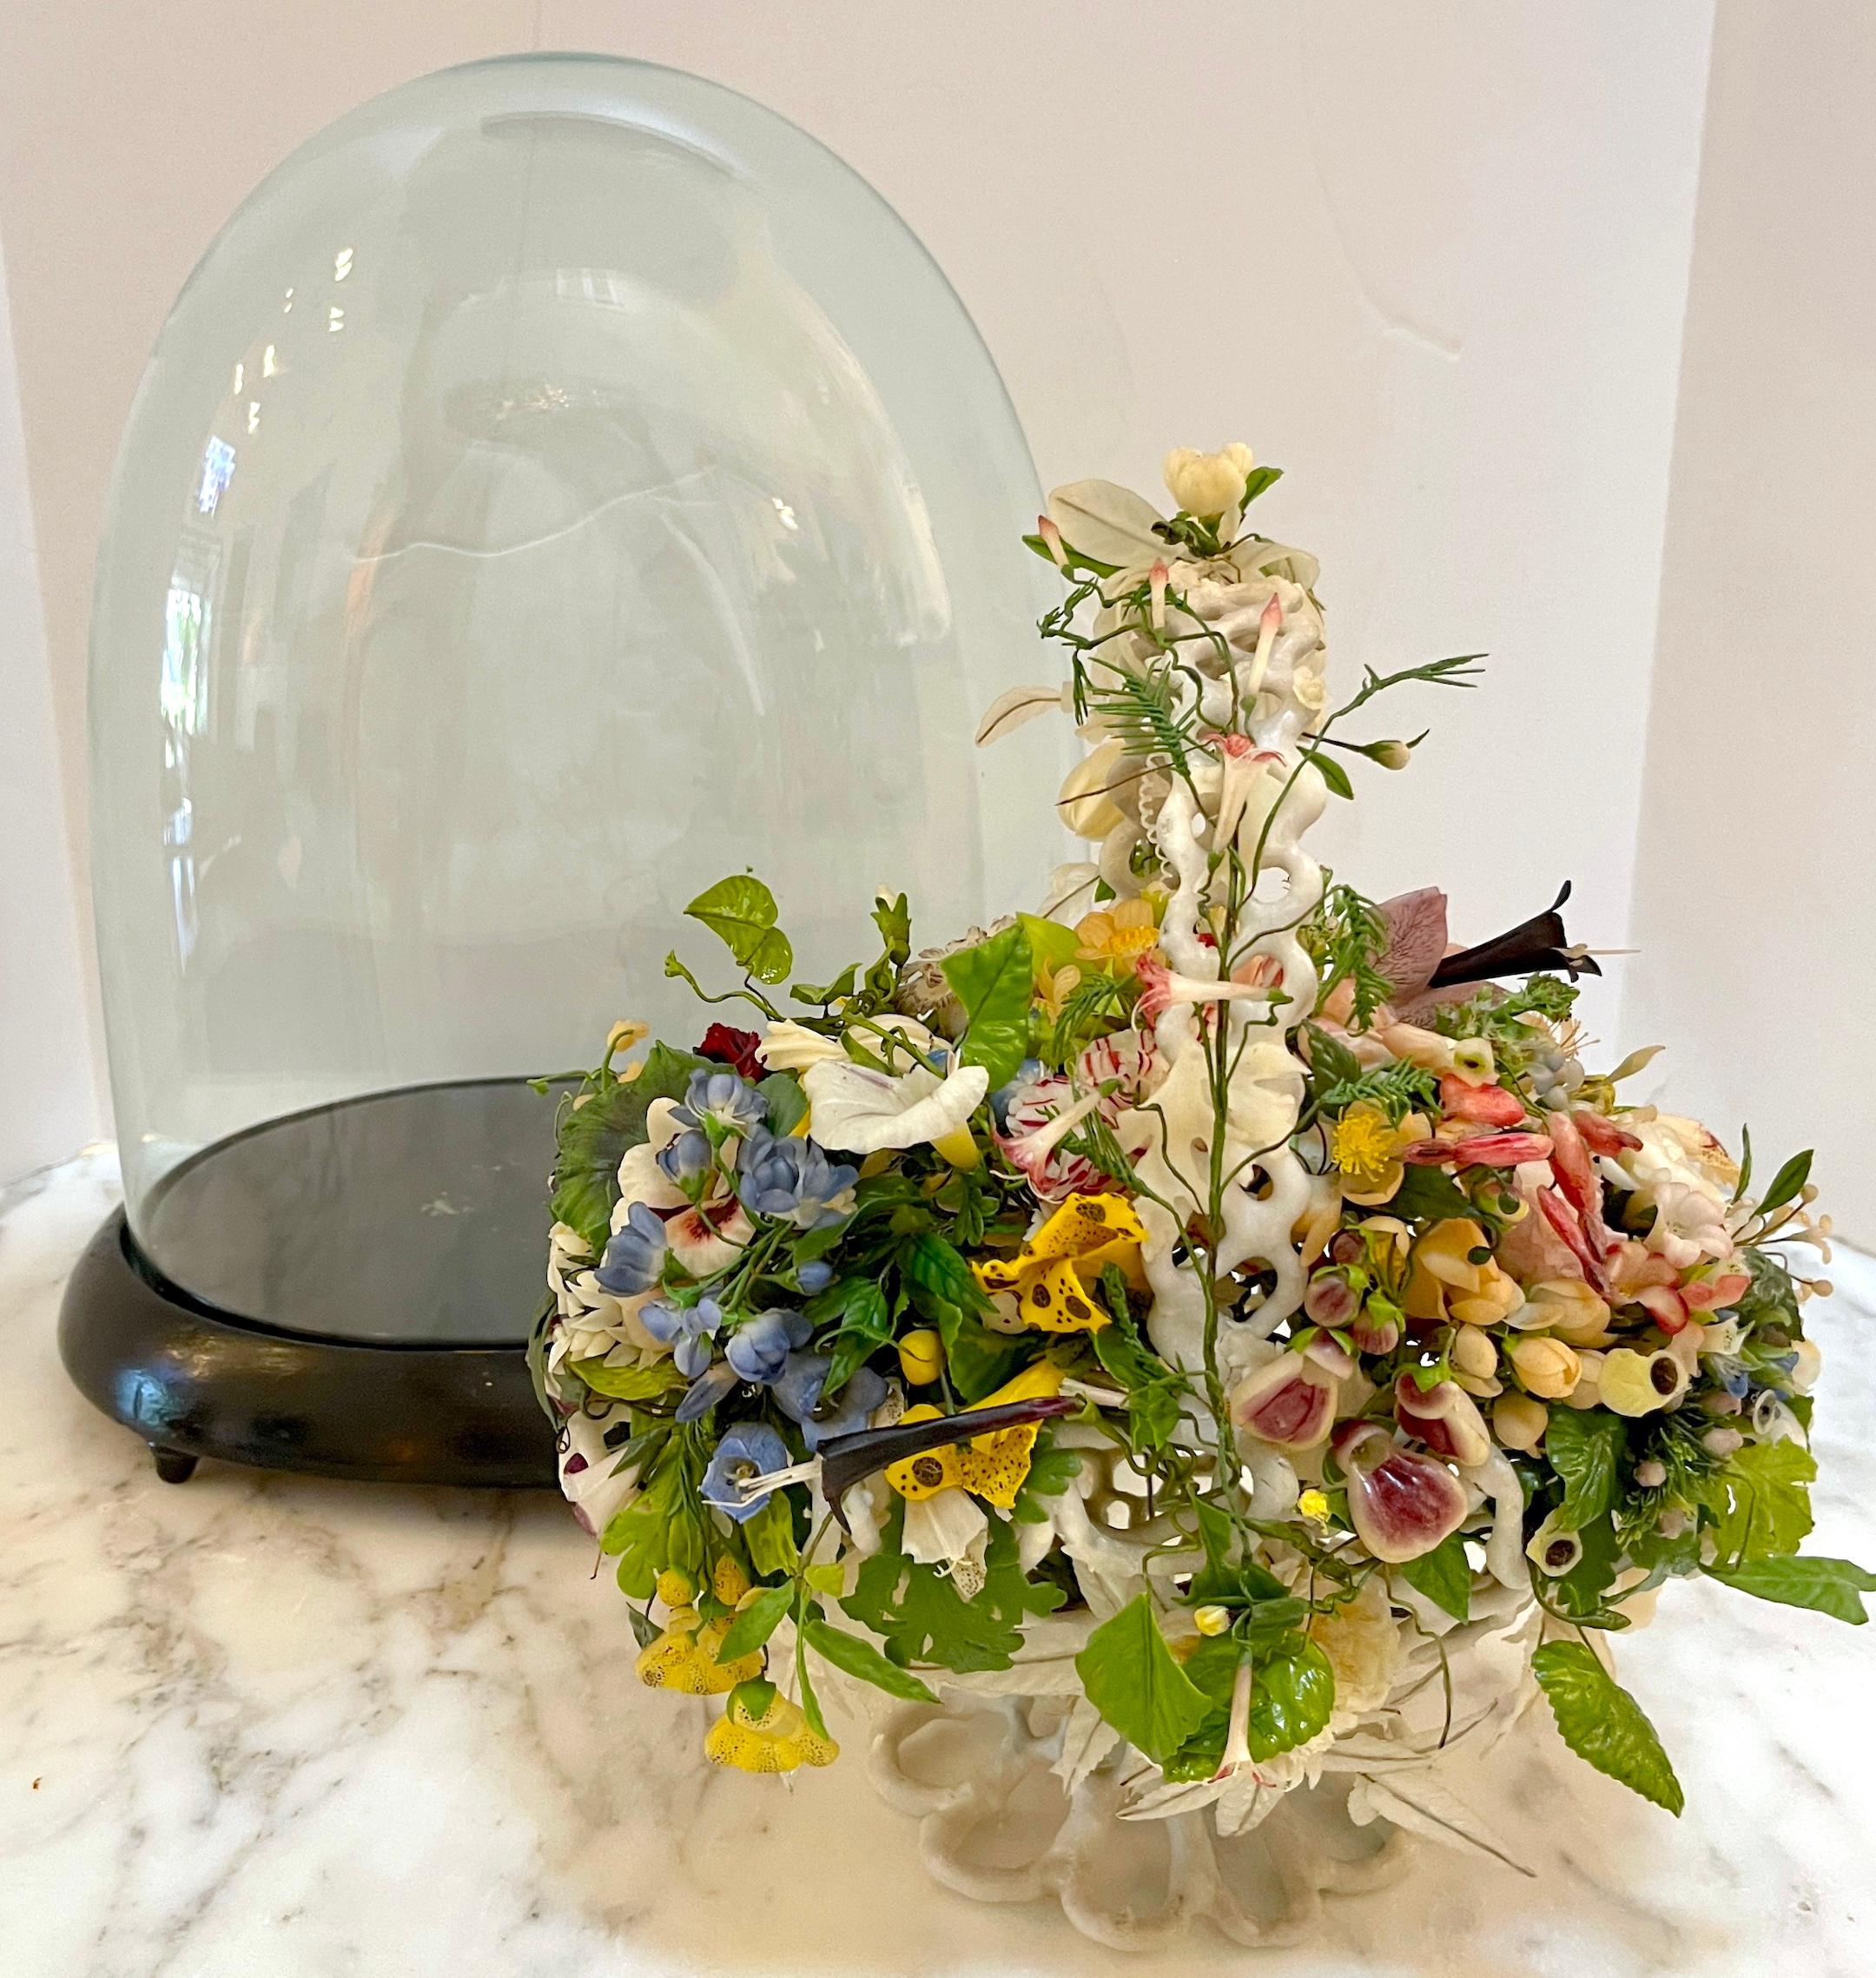 Victorian Wax Flower Basket Still Life Under Oval Glass Dome For Sale 13